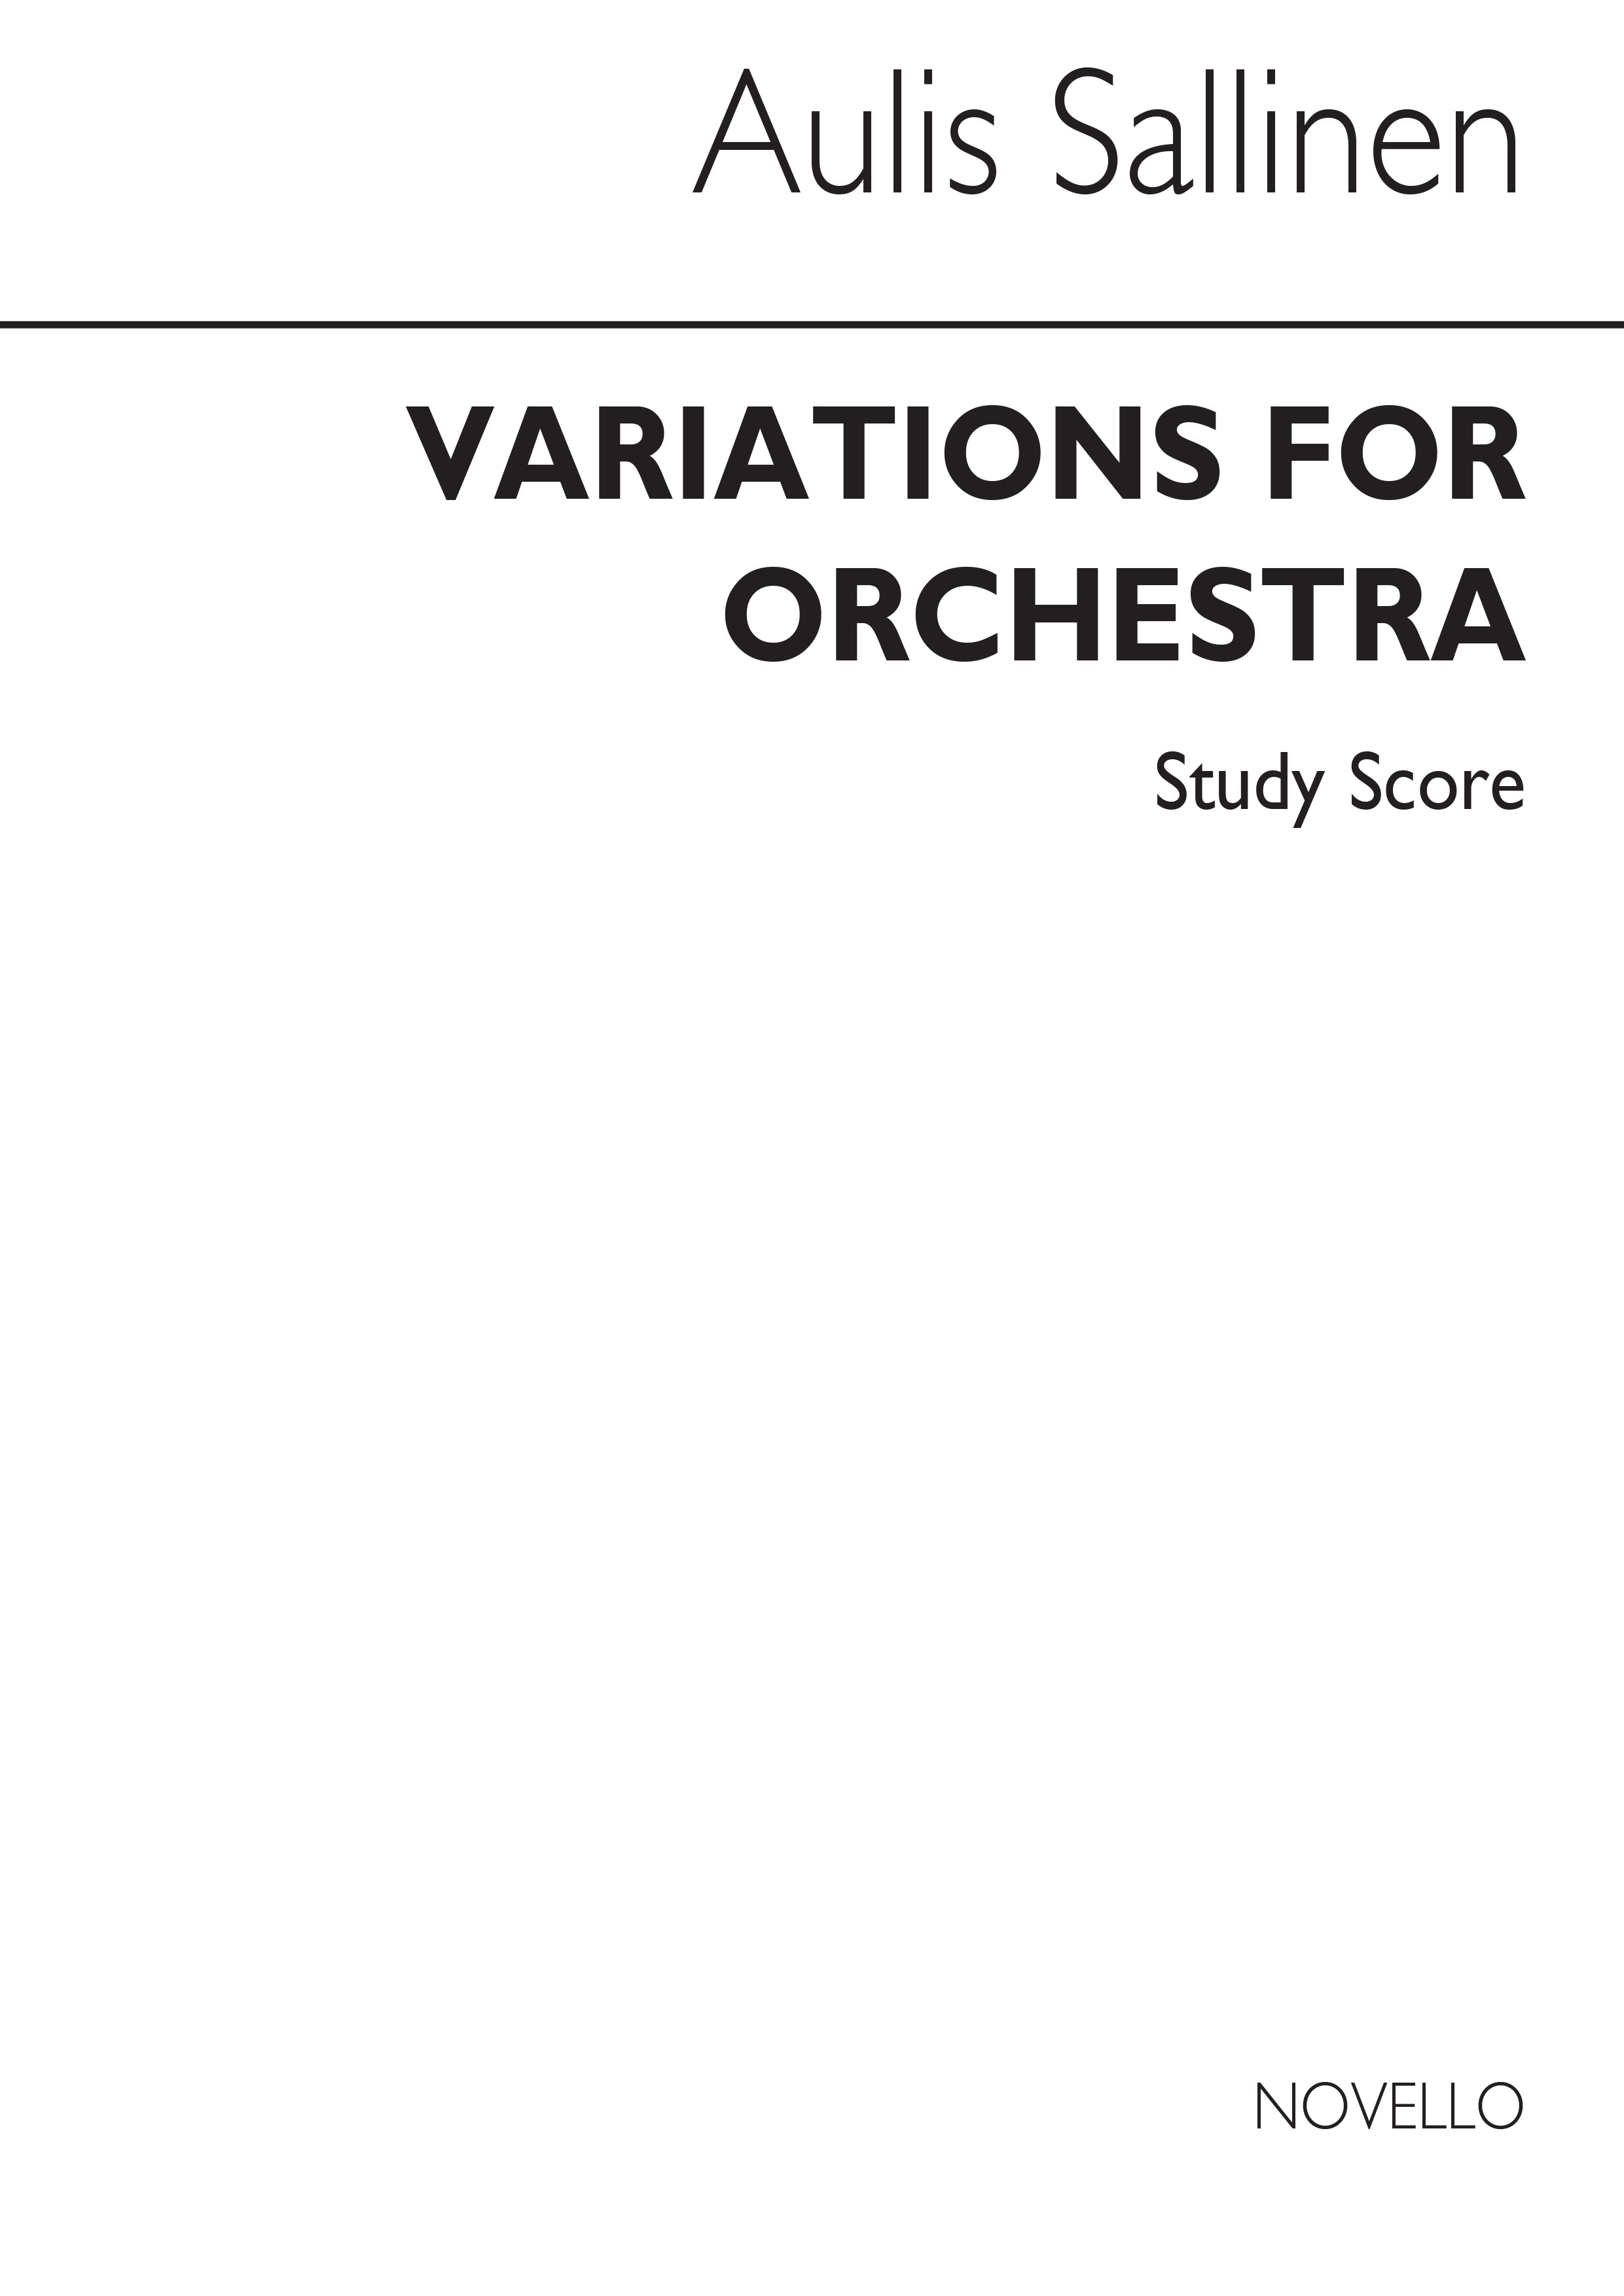 Sallinen: Variations For Orchestra (Study Score)